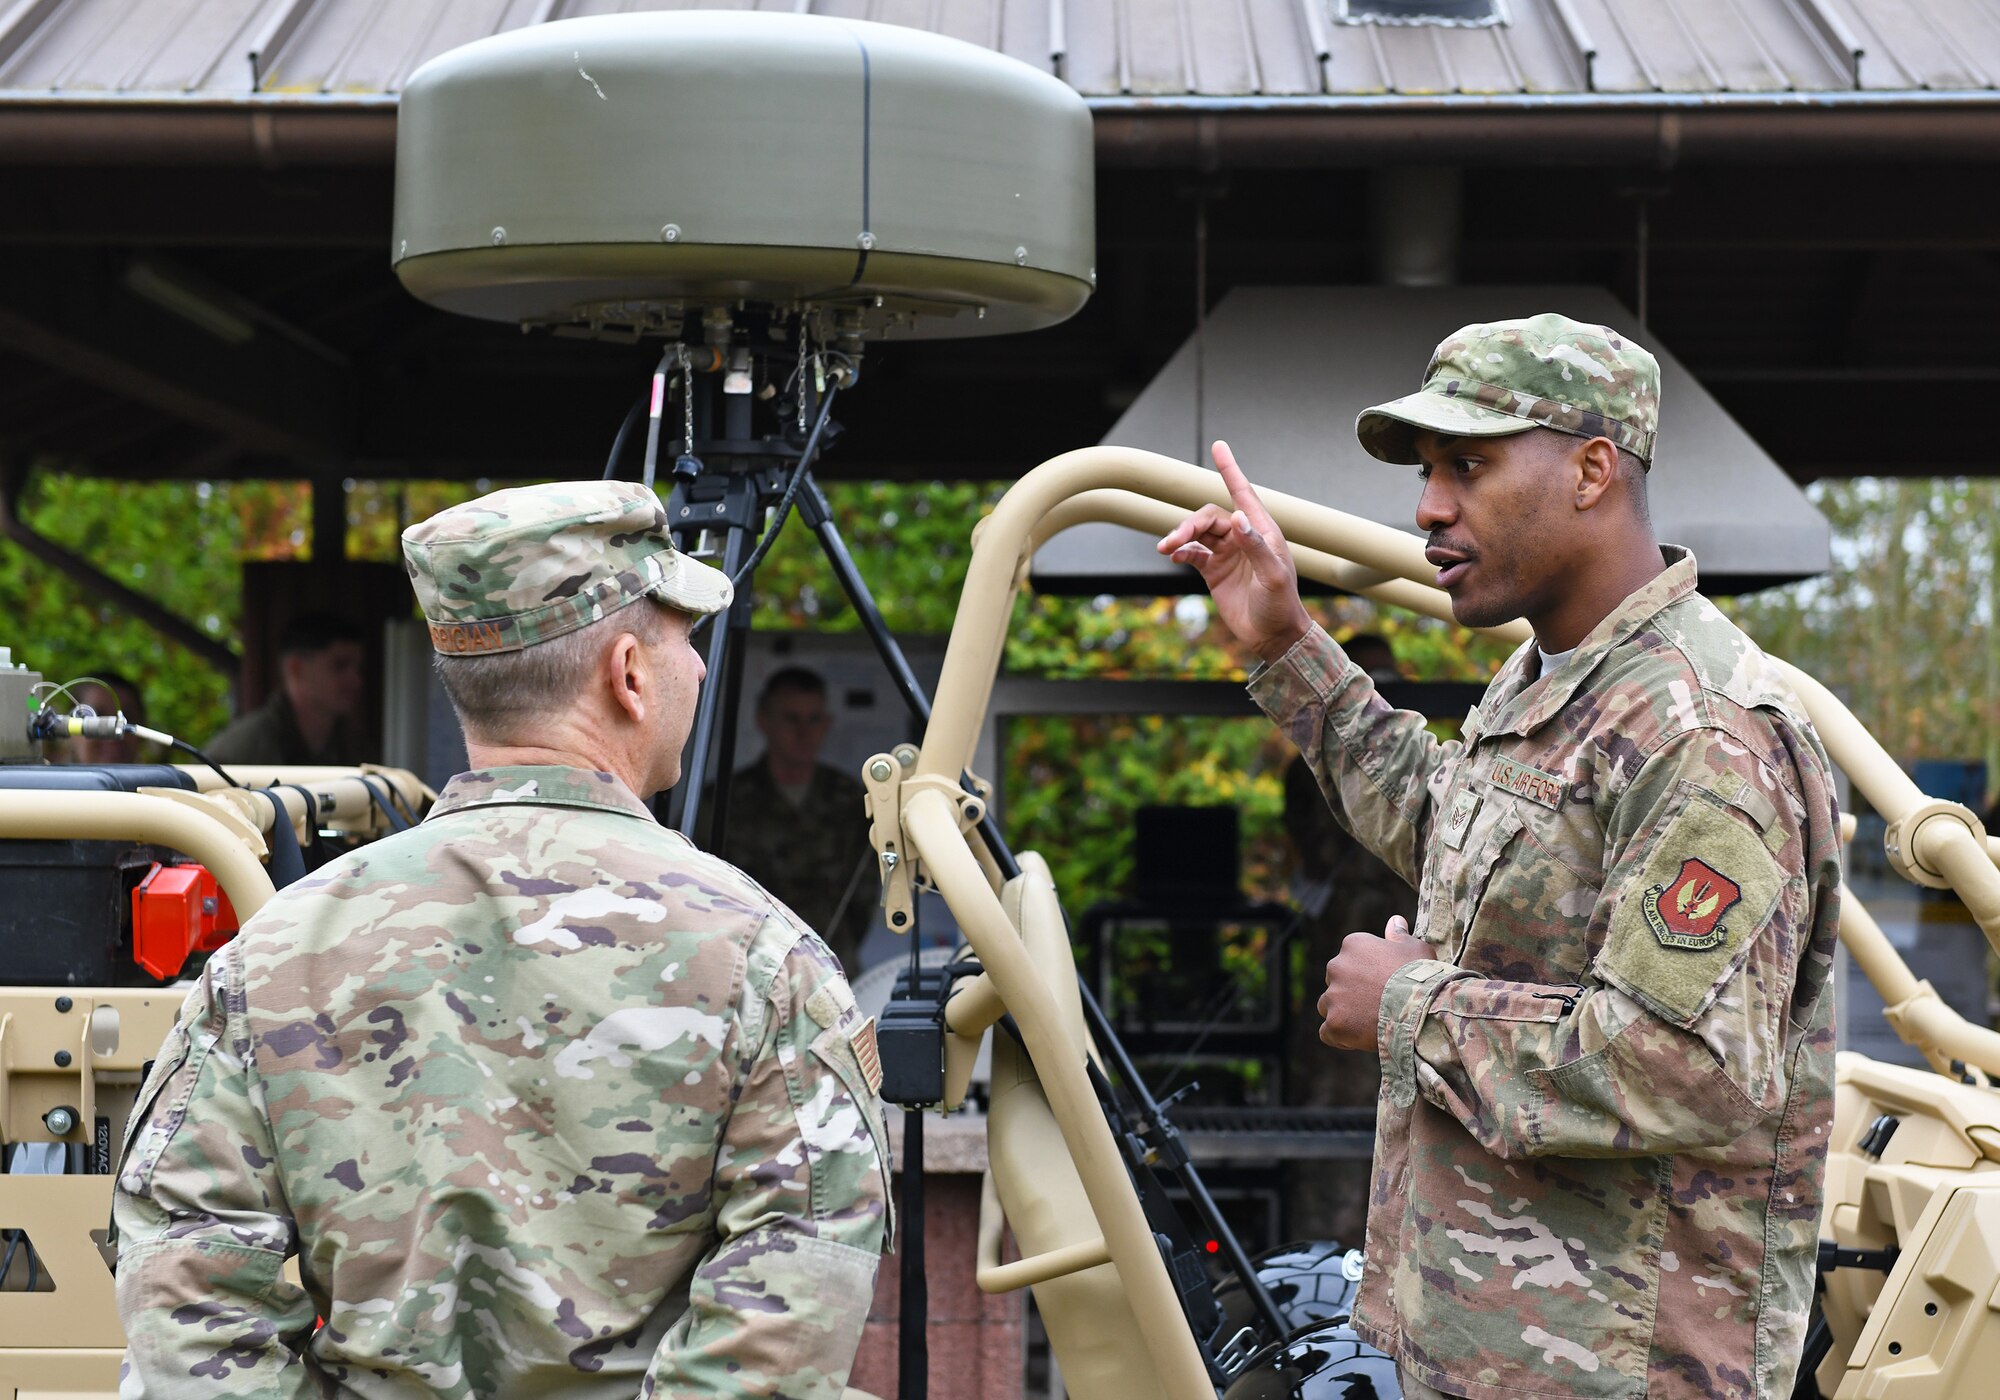 U.S. Air Force Staff Sgt. Sean Scott, right, 1st Combat Communications Squadron landing zone safety officer, briefs Gen. Jeff Harrigian, U.S. Air Forces Europe and Air Forces Africa commander, during an immersion tour at Ramstein Air Base, Germany, Oct. 23, 2019. During the tour, Harrigian learned about Airmen’s innovations and challenges as well as current operations from experts across the 435th Air Ground Operations Wing and the 435th Air Expeditionary Wing. (U.S. Air Force photo by Staff Sgt. Alex Fox Echols III)